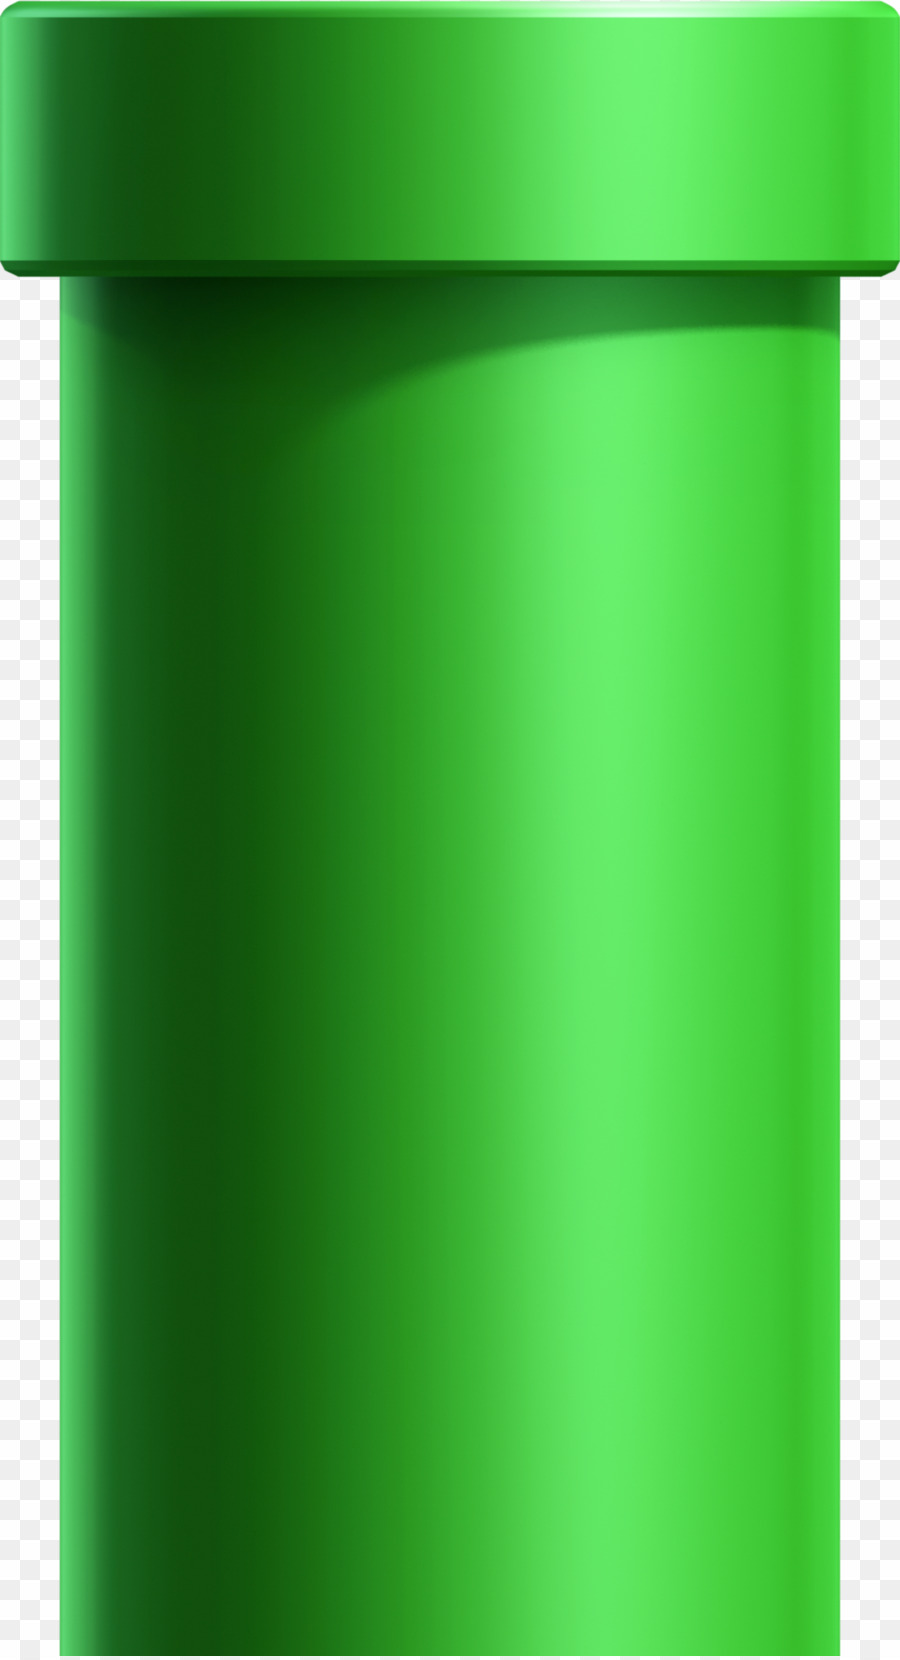 Mario pipe png.